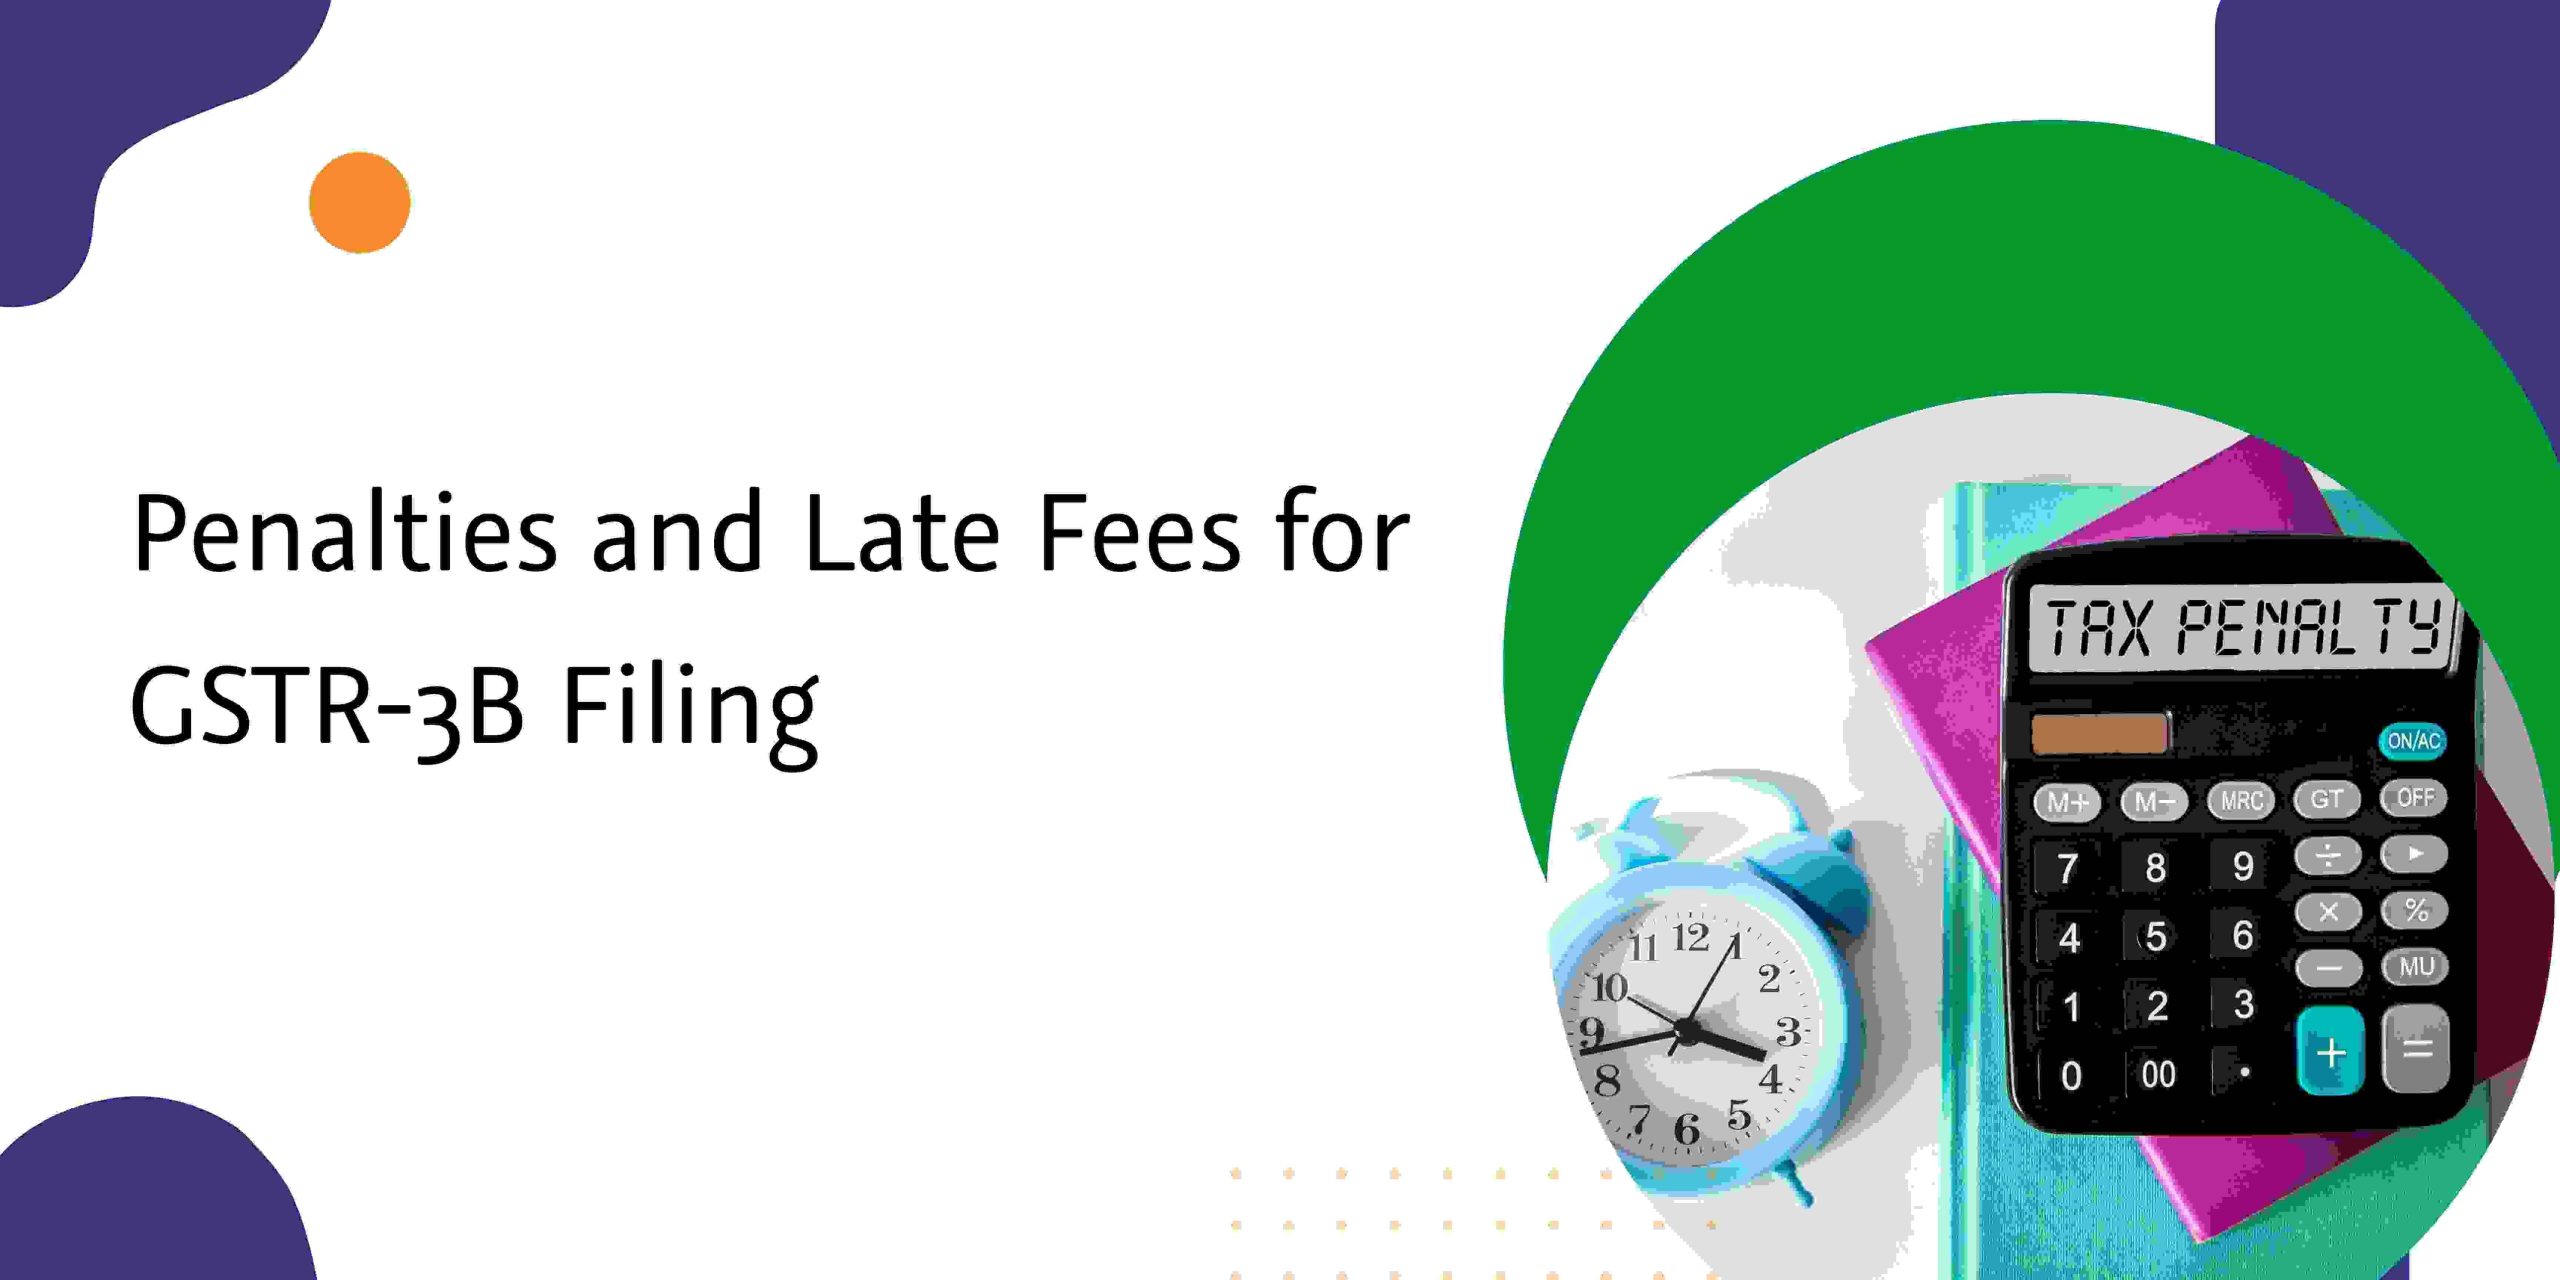 CaptainBiz: Penalties and Late Fees for GSTR-3B Filing